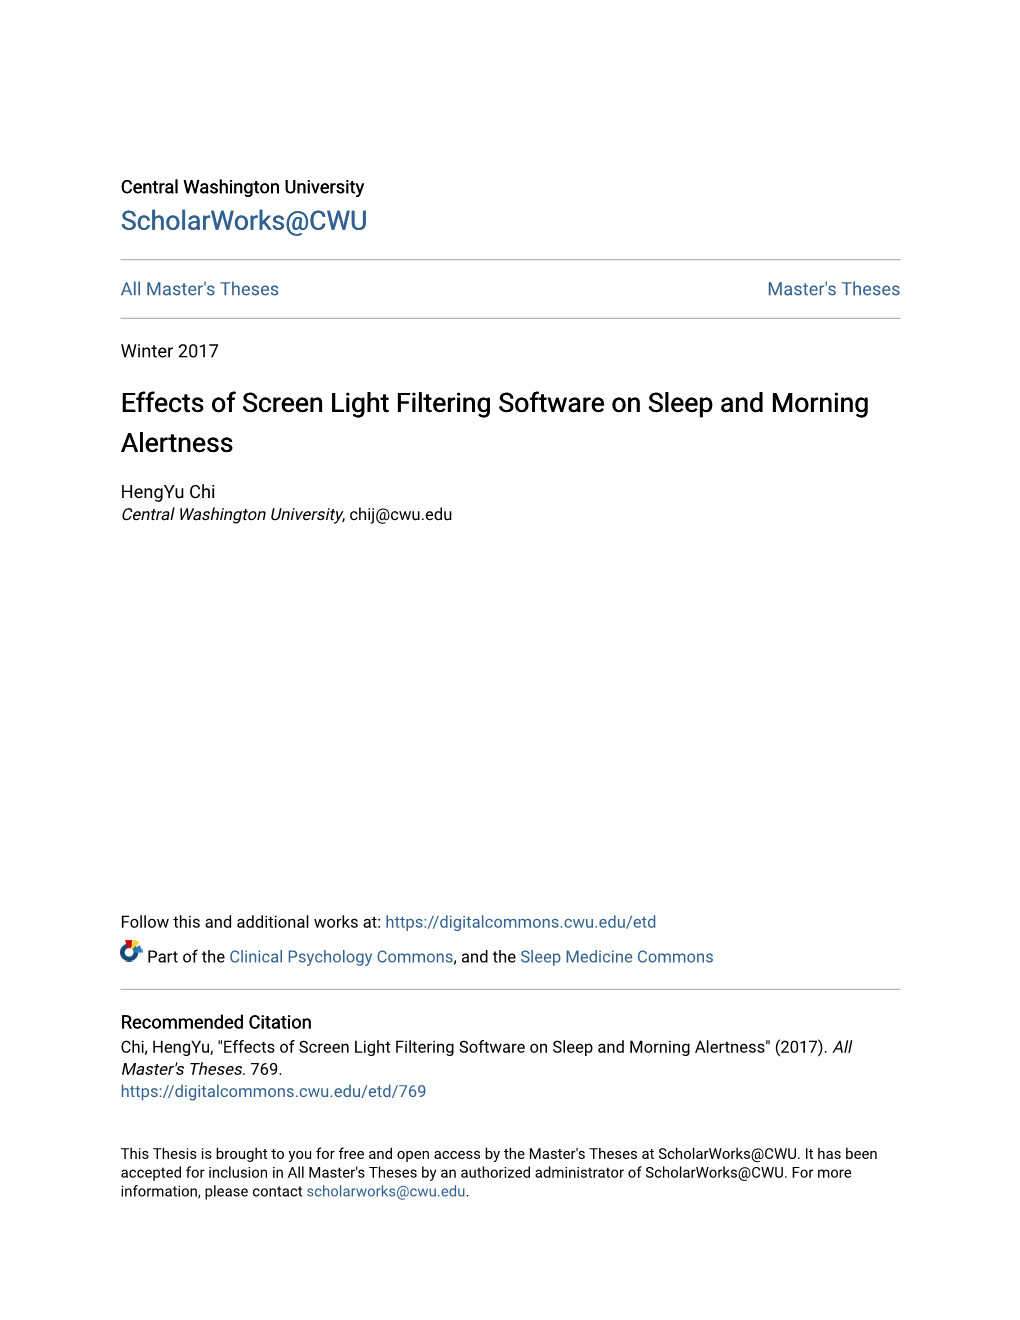 Effects of Screen Light Filtering Software on Sleep and Morning Alertness